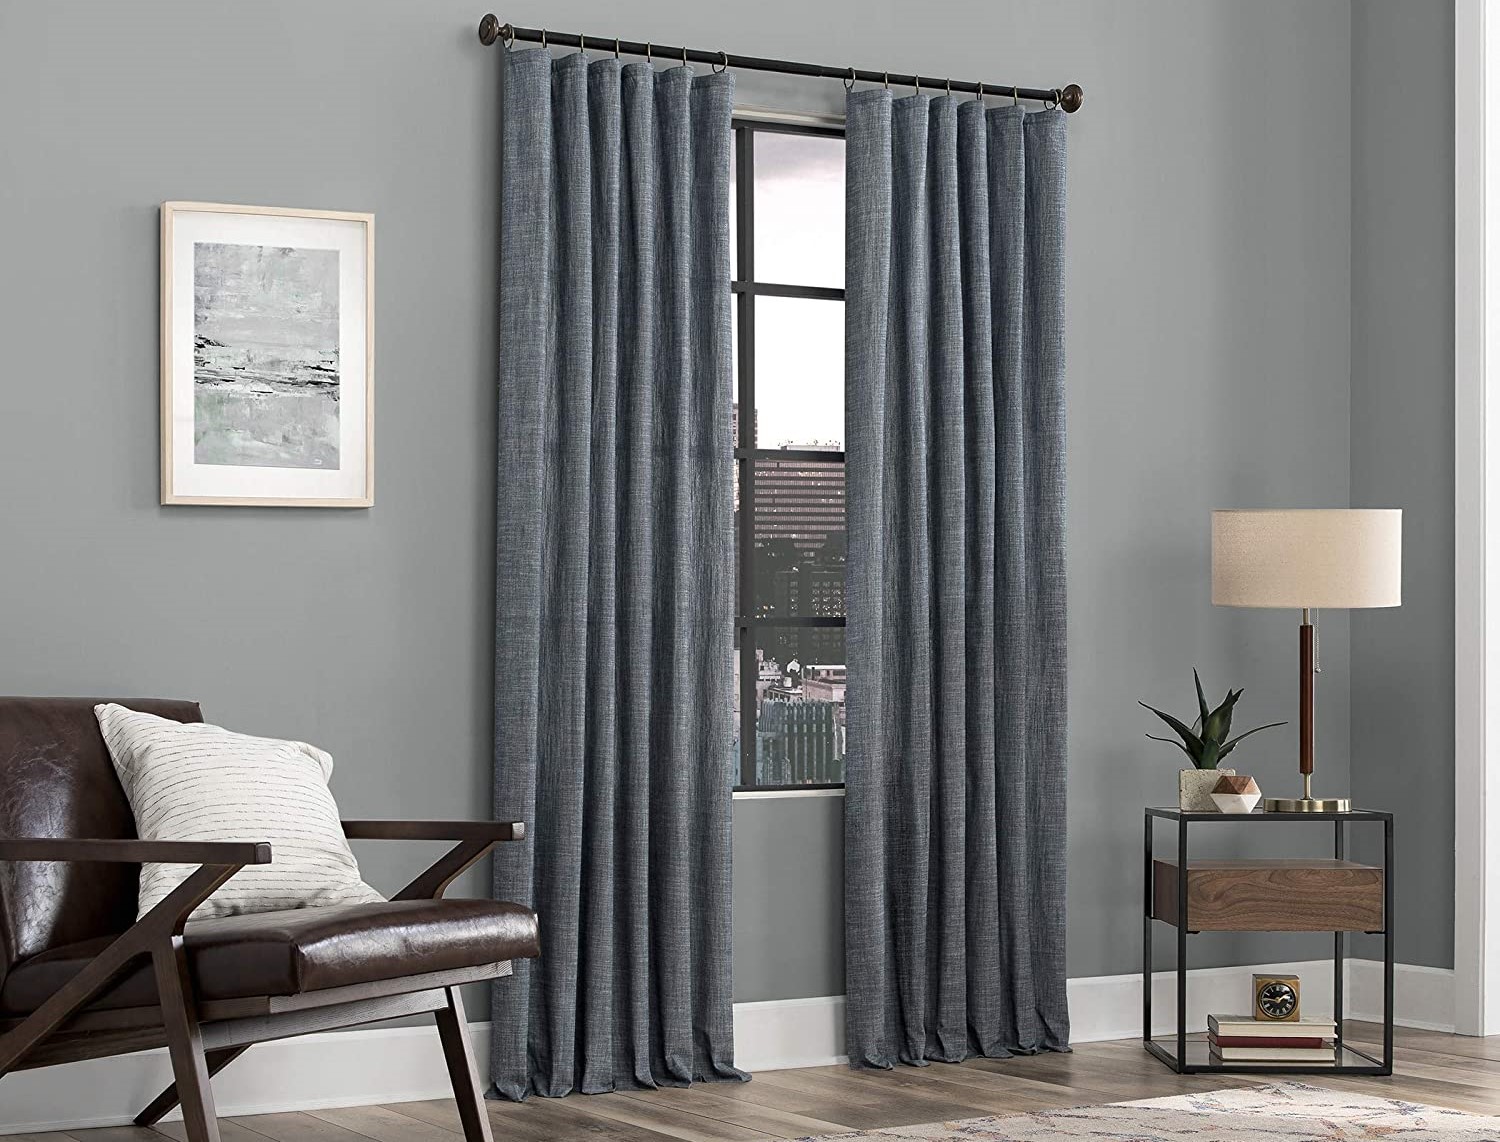 Blackout Curtains Eyelet Ring Top Ready Made Lined Crushed Velvet Door  Curtain | eBay